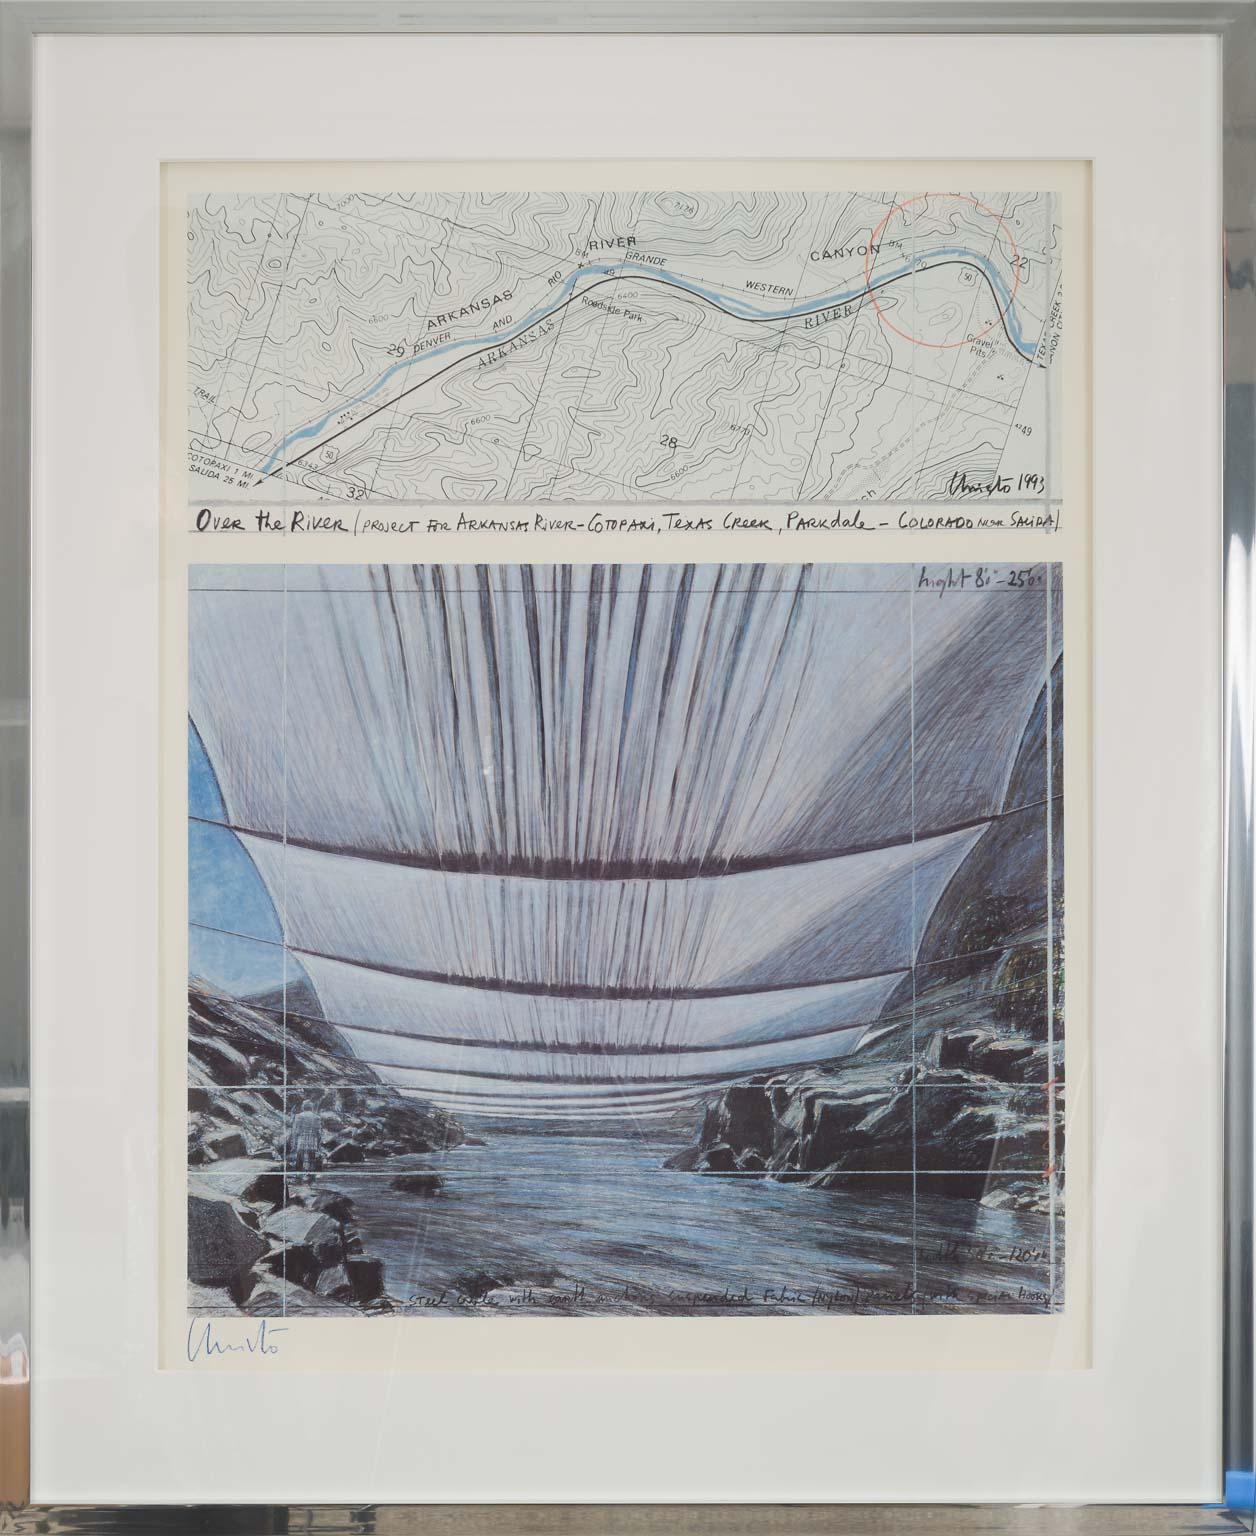 over the river christo